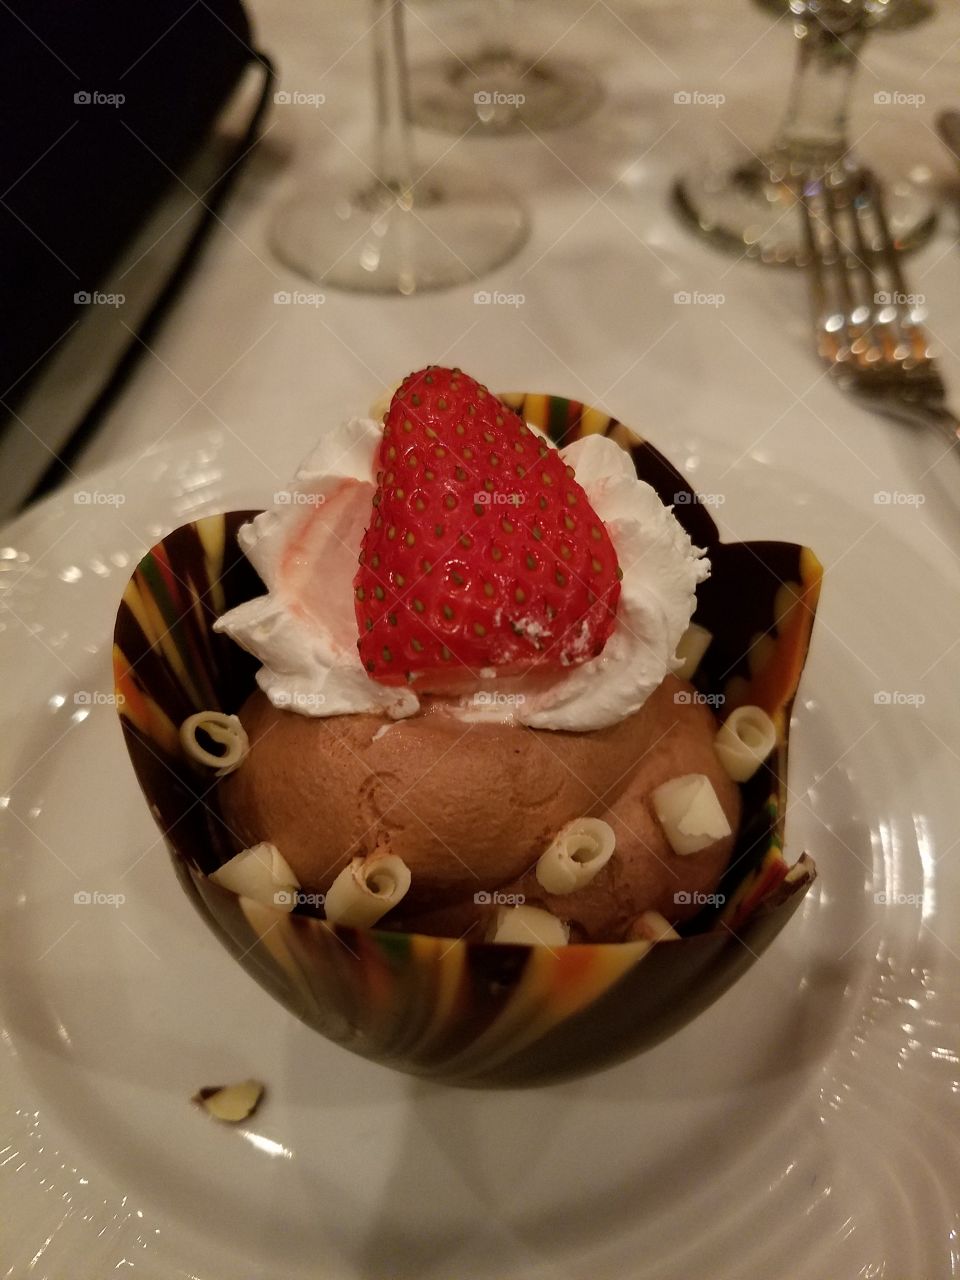 gourmet chocolate dessert, chocolate mousse whipped cream with a strawberry